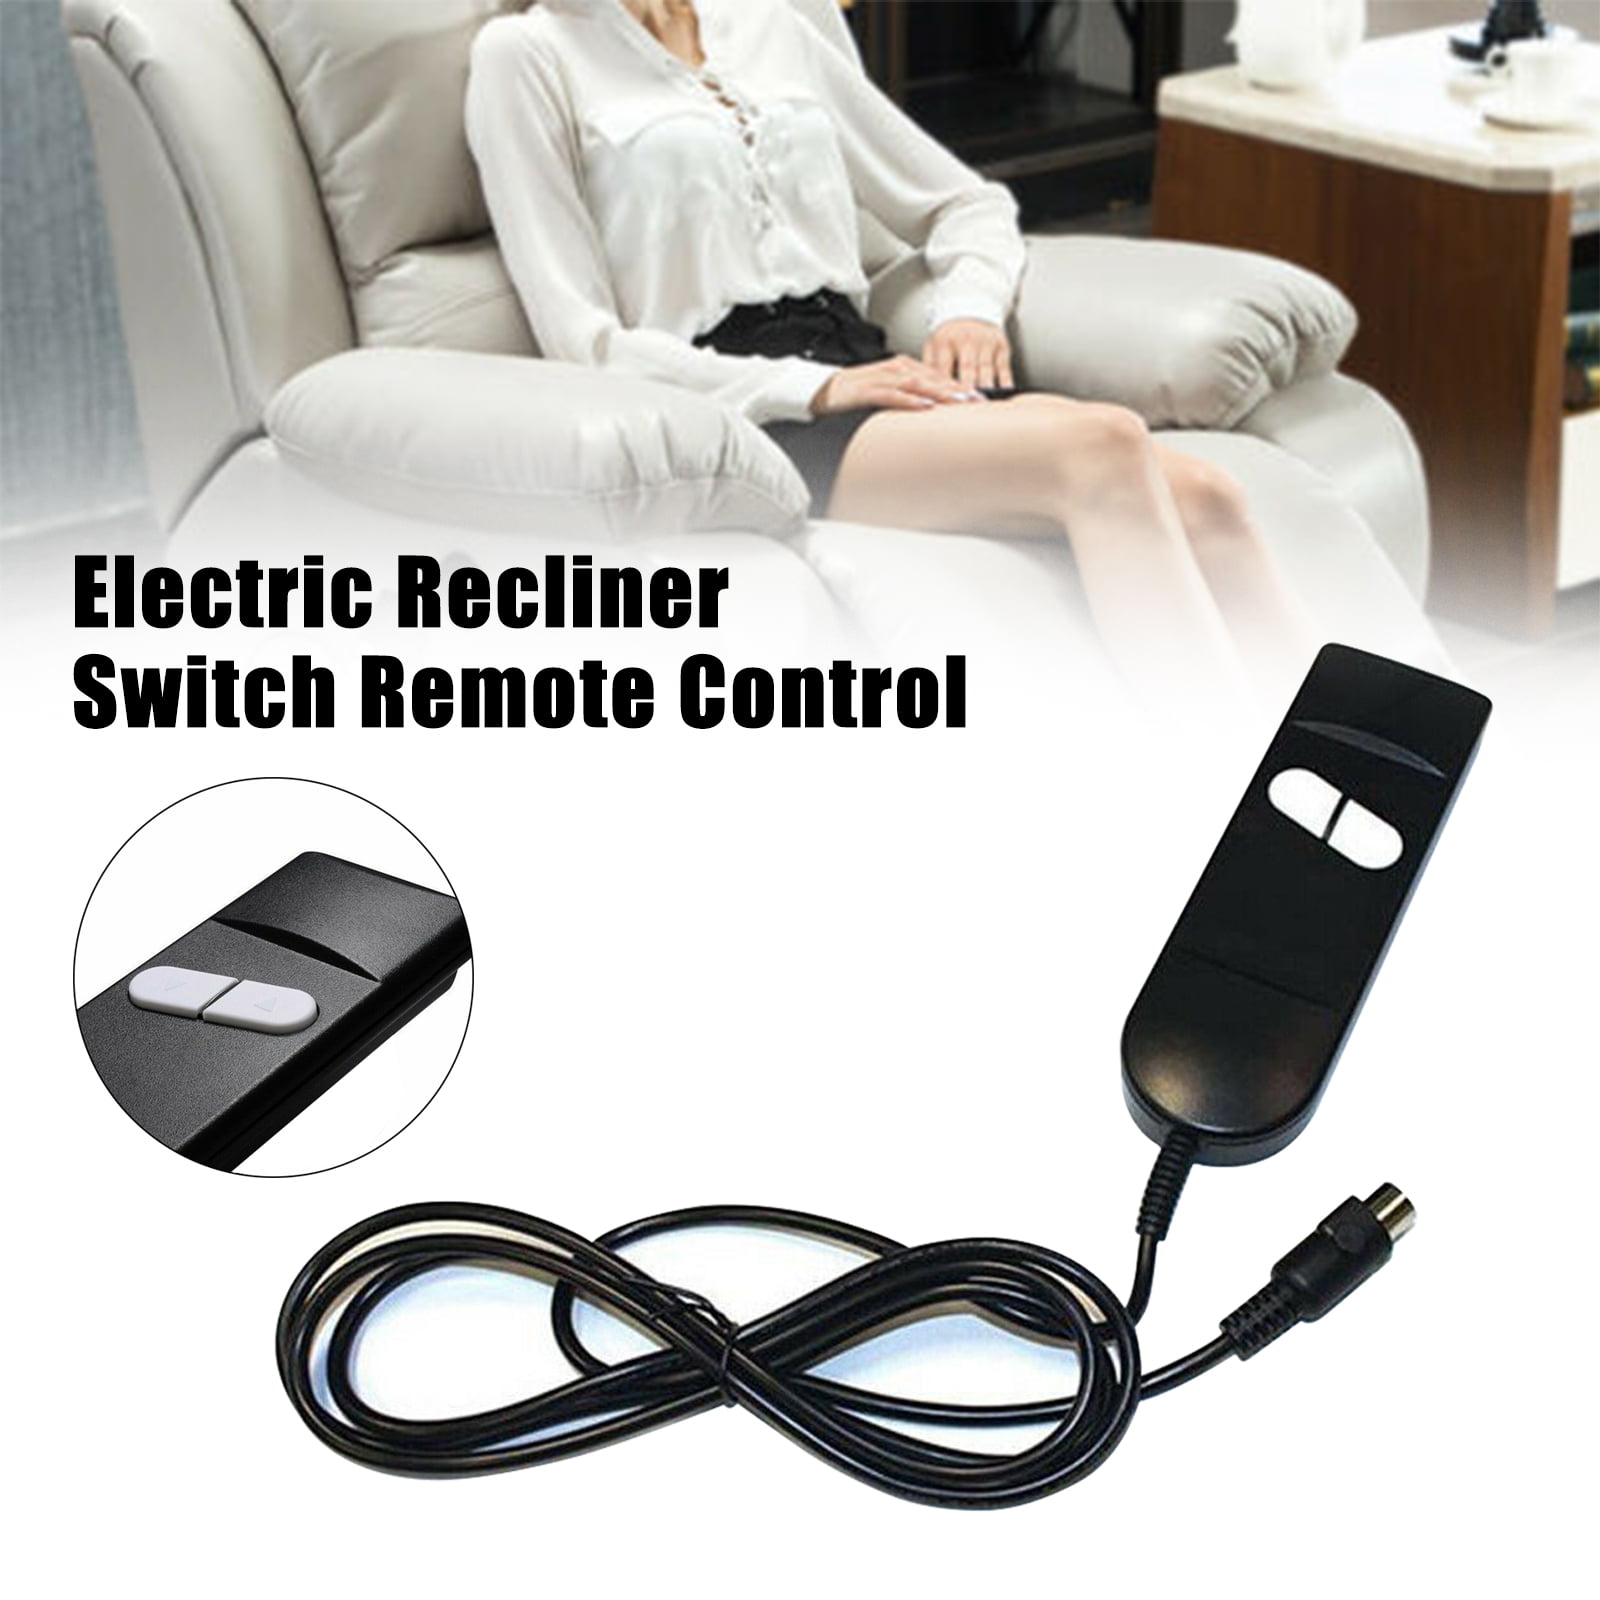 Power wheelchair Sofa Mobility scooter Lift Chair Hand Control Remote 5Pins 